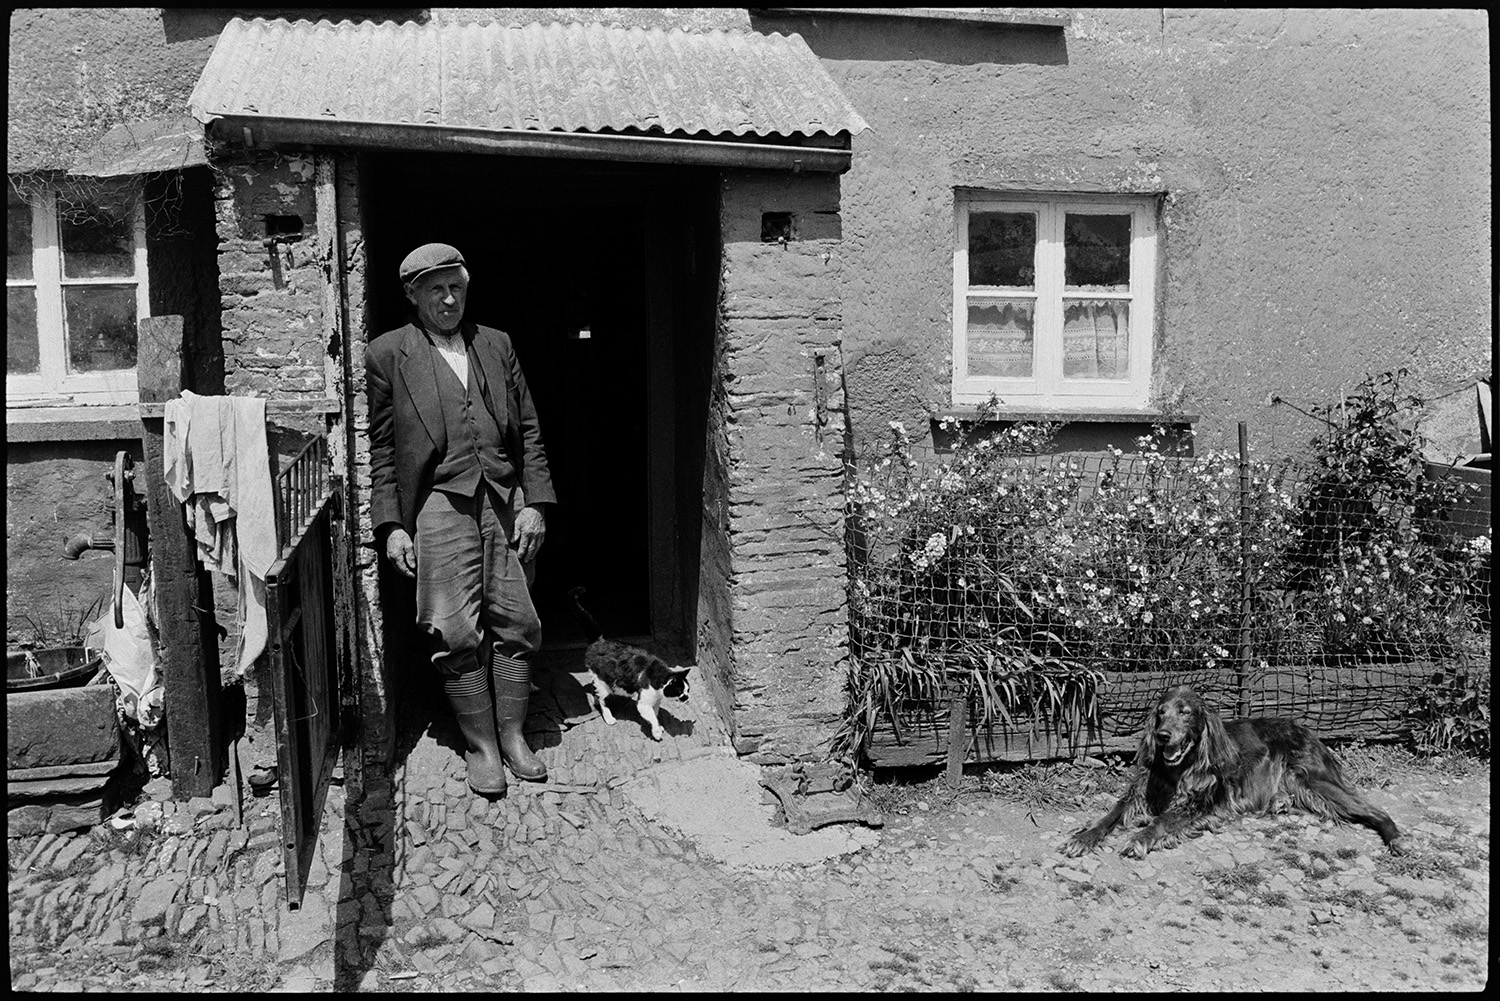 Farmer standing at front door porch and cobbles.
[Wilfie Spiers and a cat standing in the porch at his farmhouse at Mount Pleasant, Beamsworthy. A dog is lying on cobbles by a flower bed outside the farmhouse.]